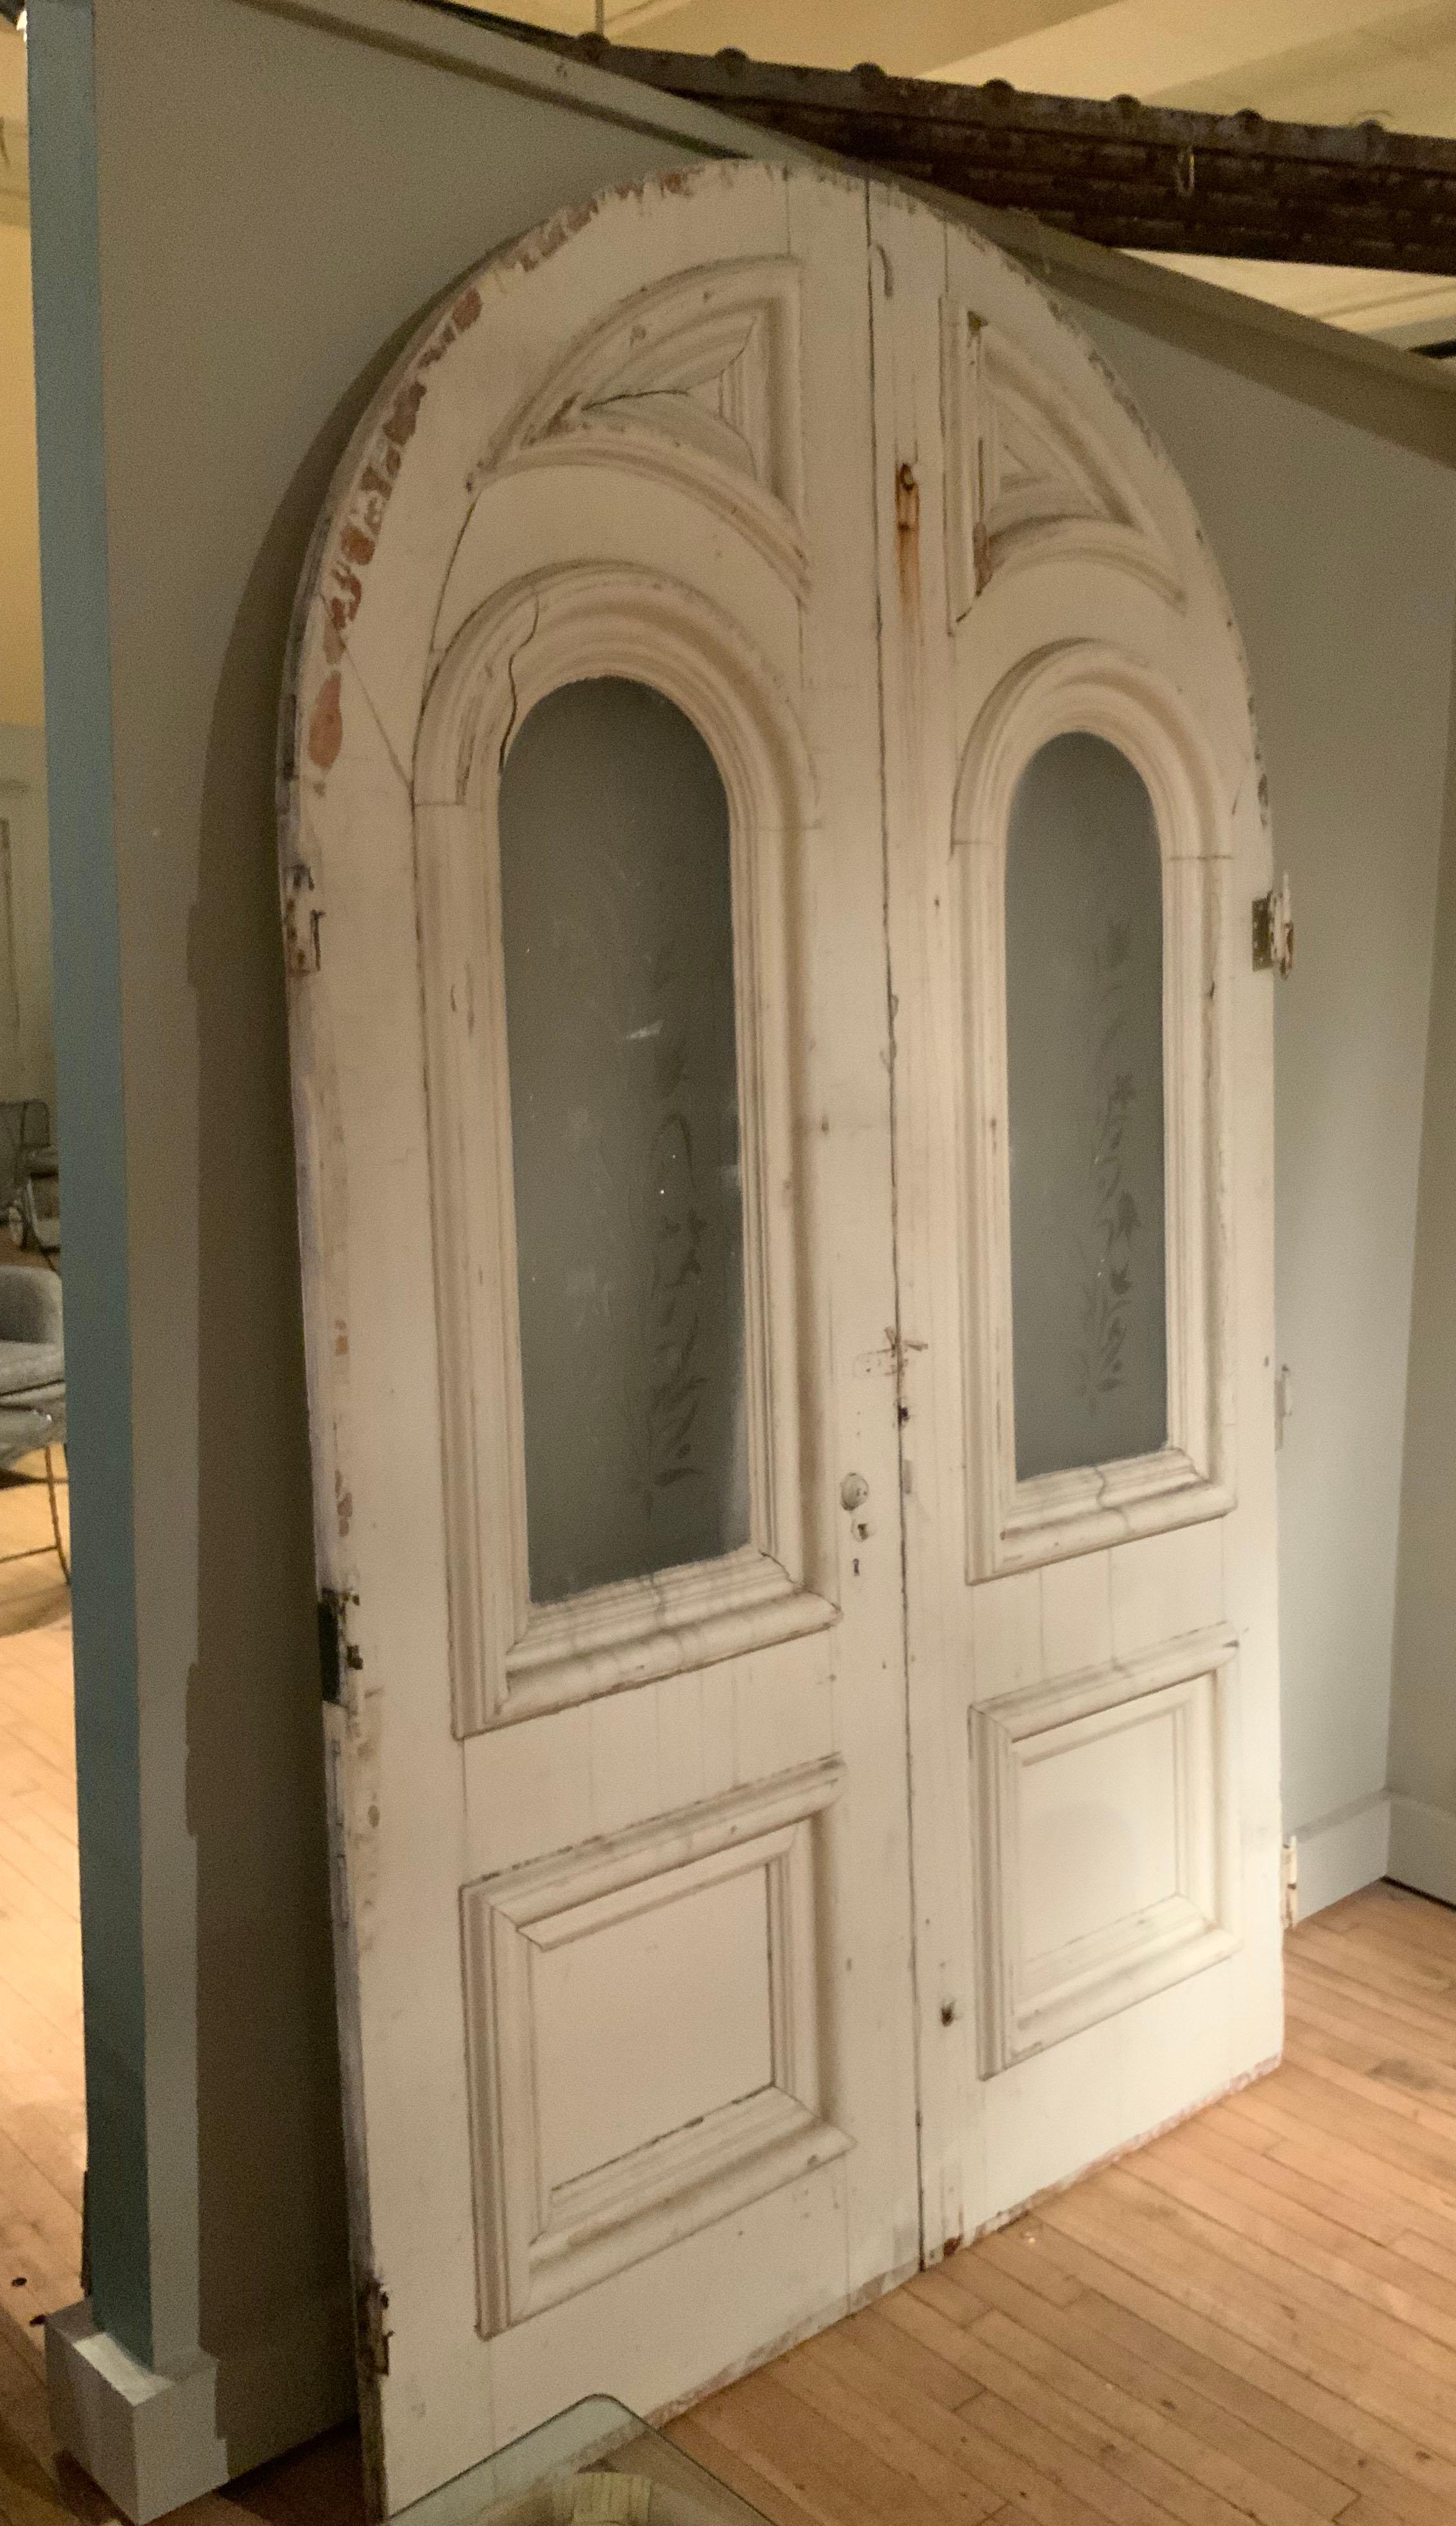 A very handsome pair of 1920's arch top exterior doors, beautifully made with elaborate paneled molding and containing the original arch top etched glass panels. these doors are in good structural condition, with age expected wear and one cut line